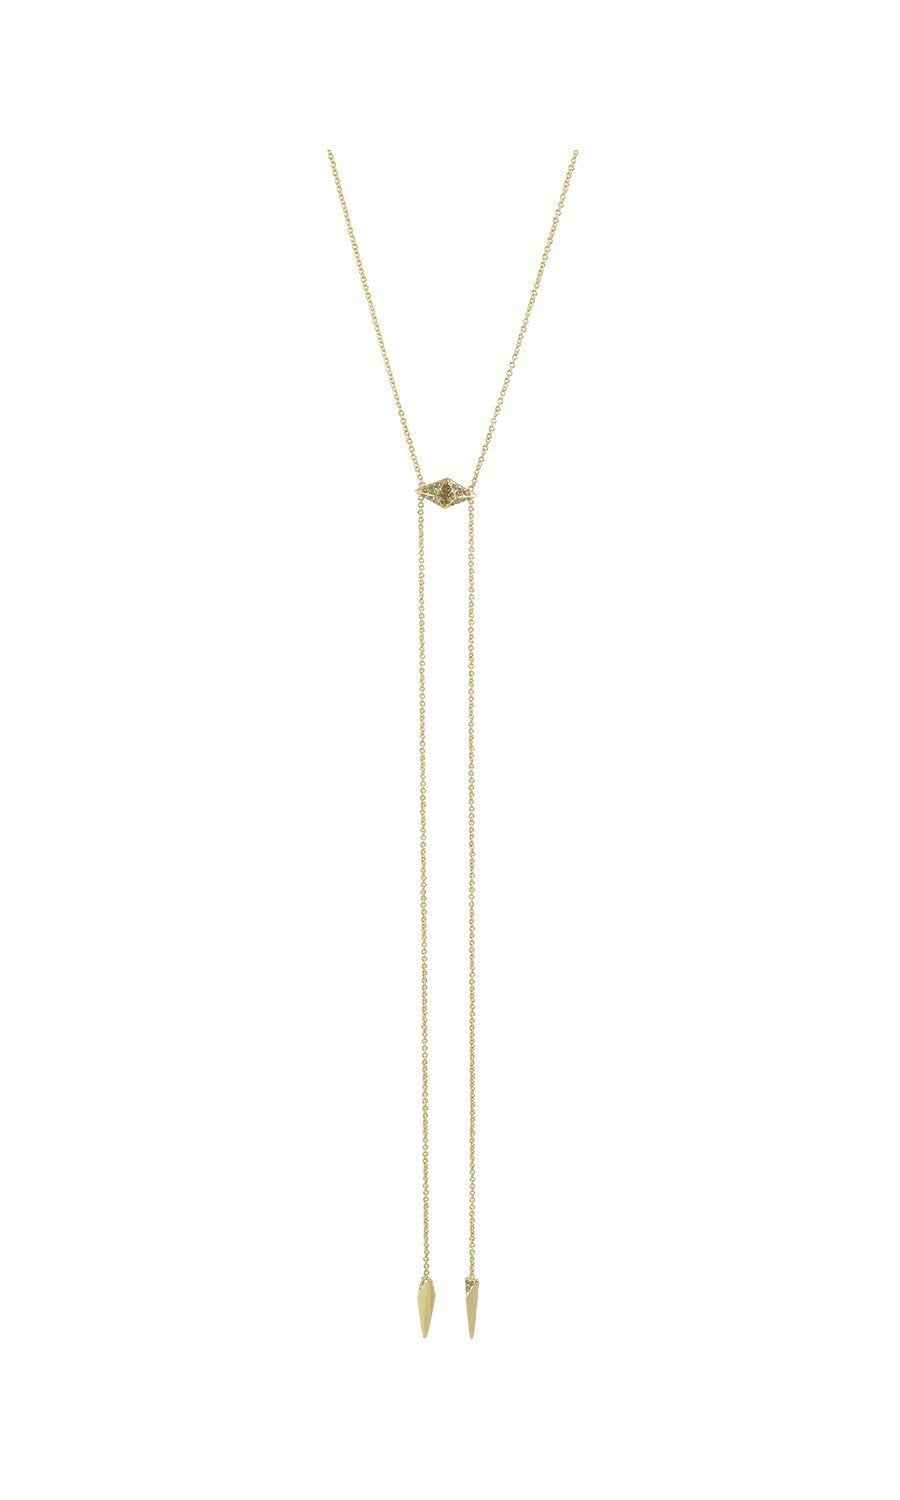 Women outfit in a necklace rental from House of Harlow 1960 called Gold Samo Bolo Tie Necklace